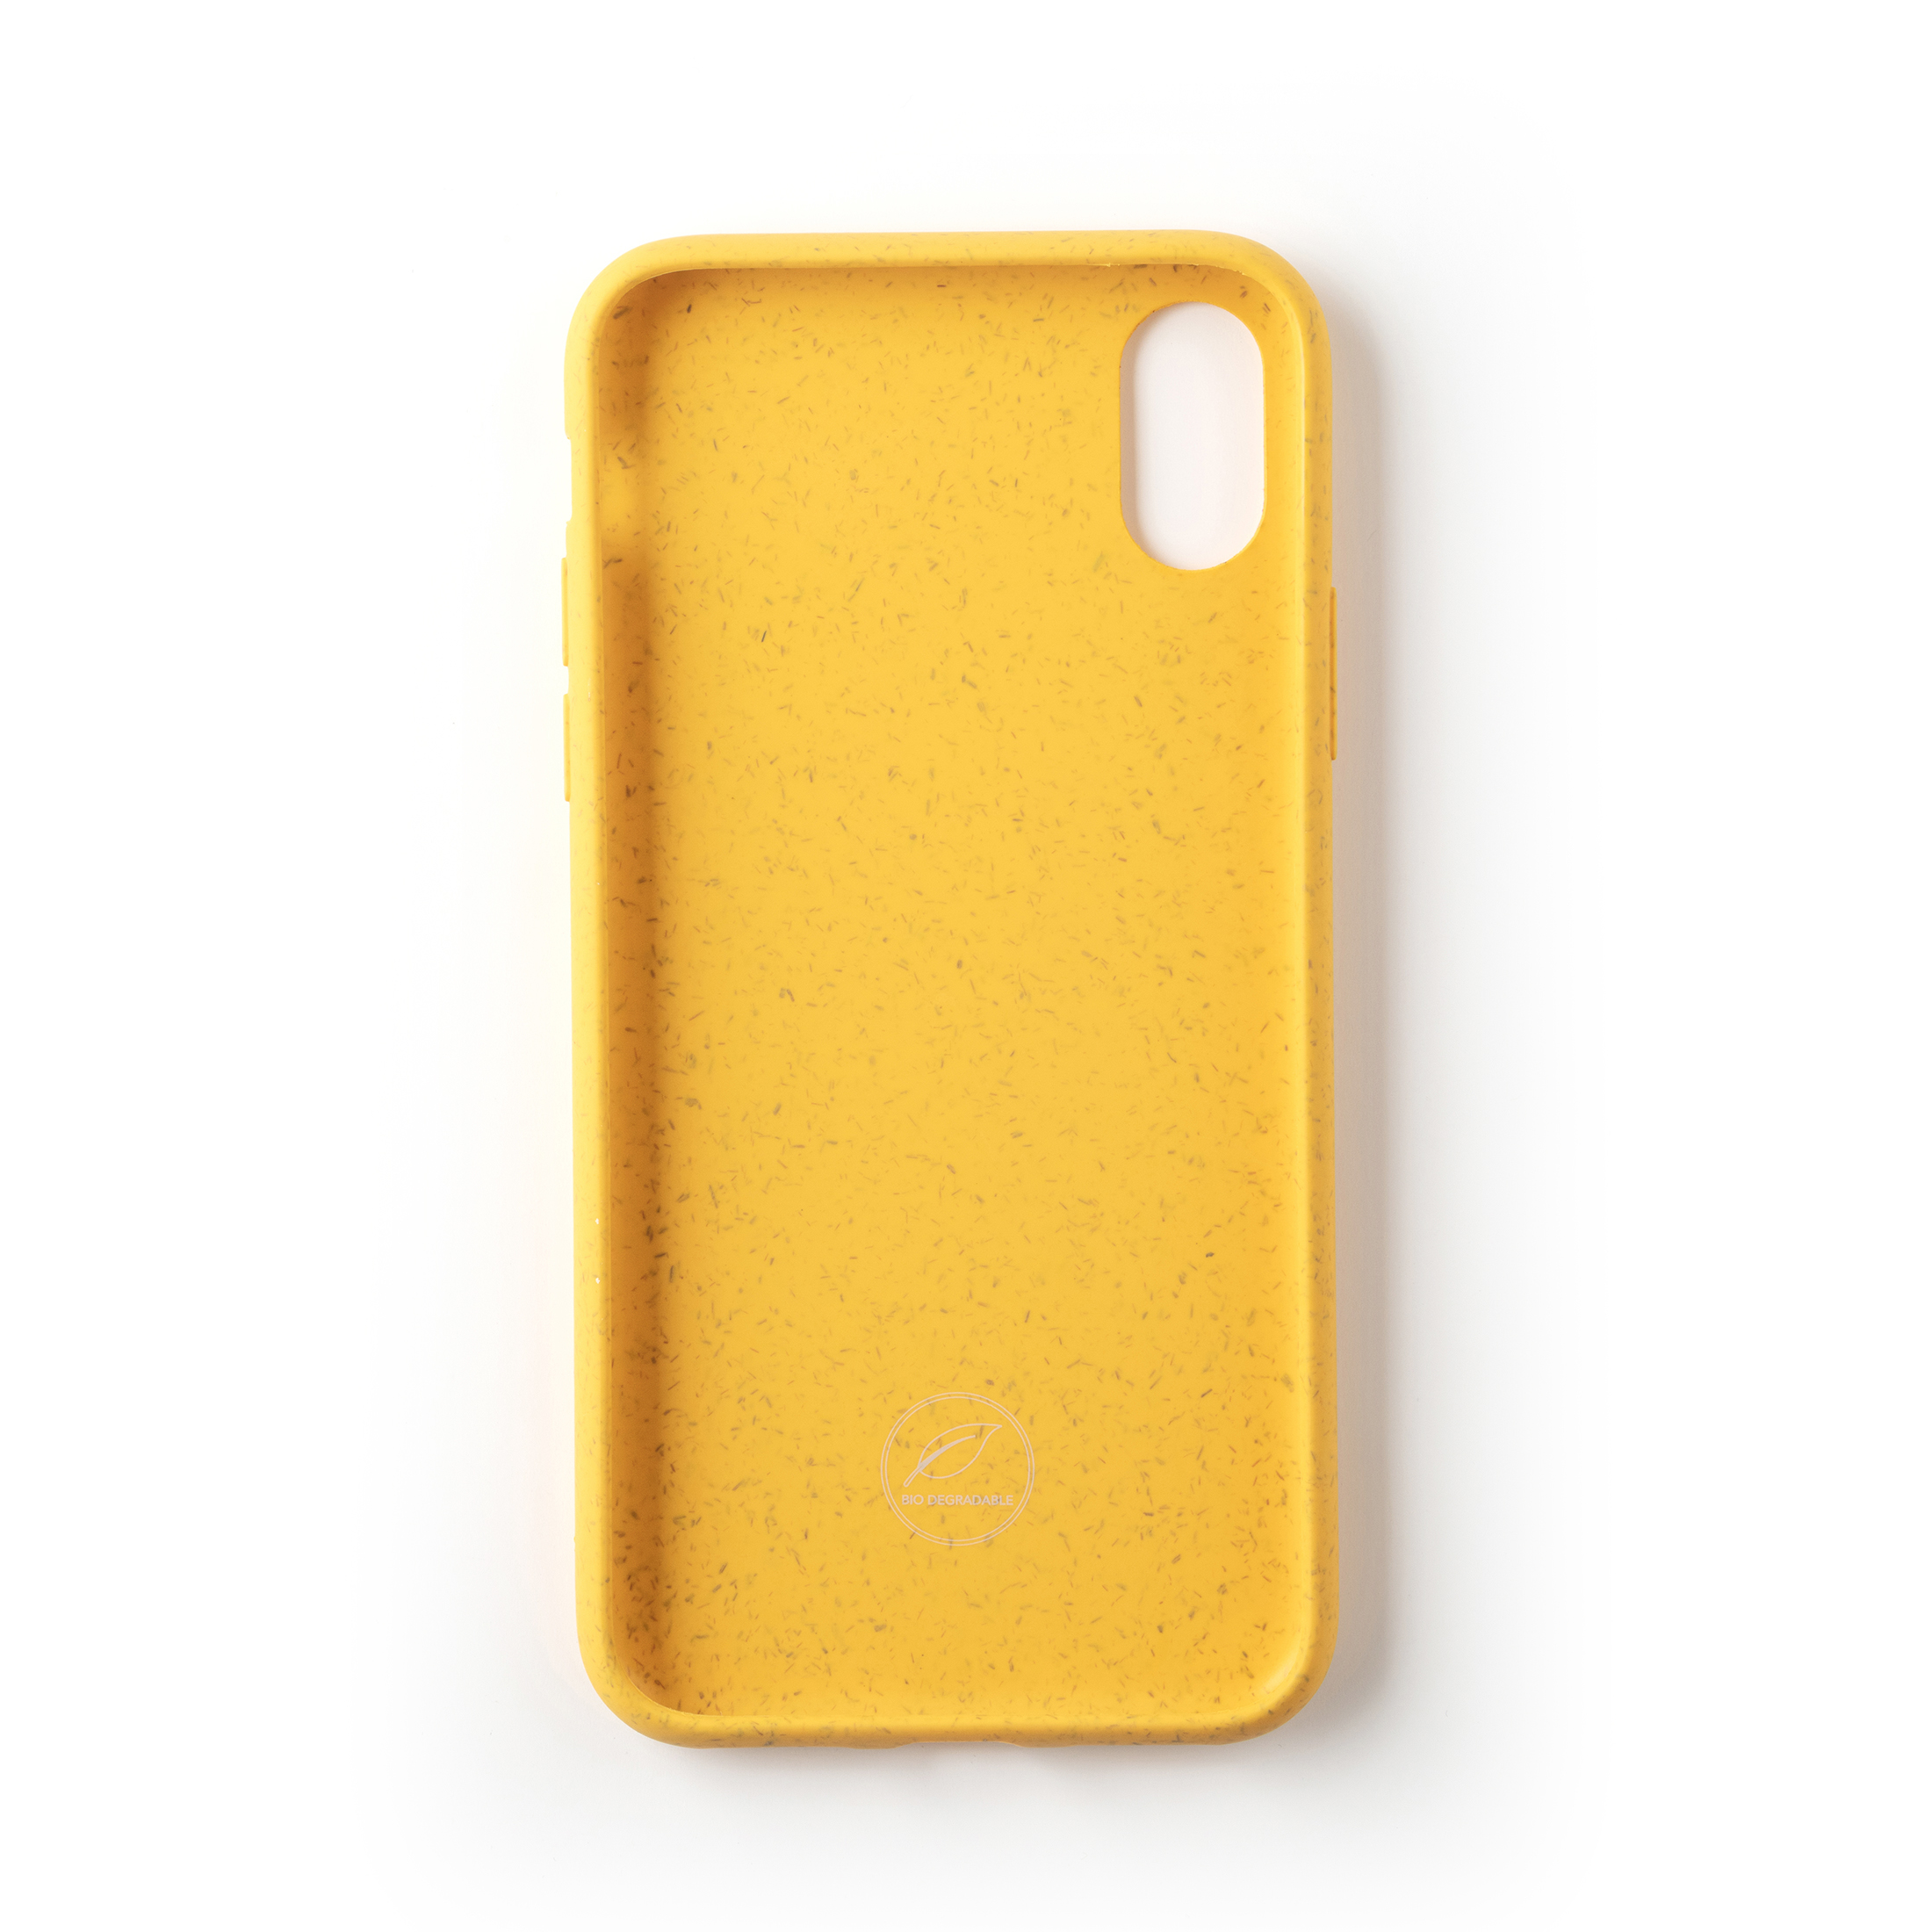 BY Backcover, FASHION WILMA yellow RIPXS, ECO iPhone Apple, X/XS,